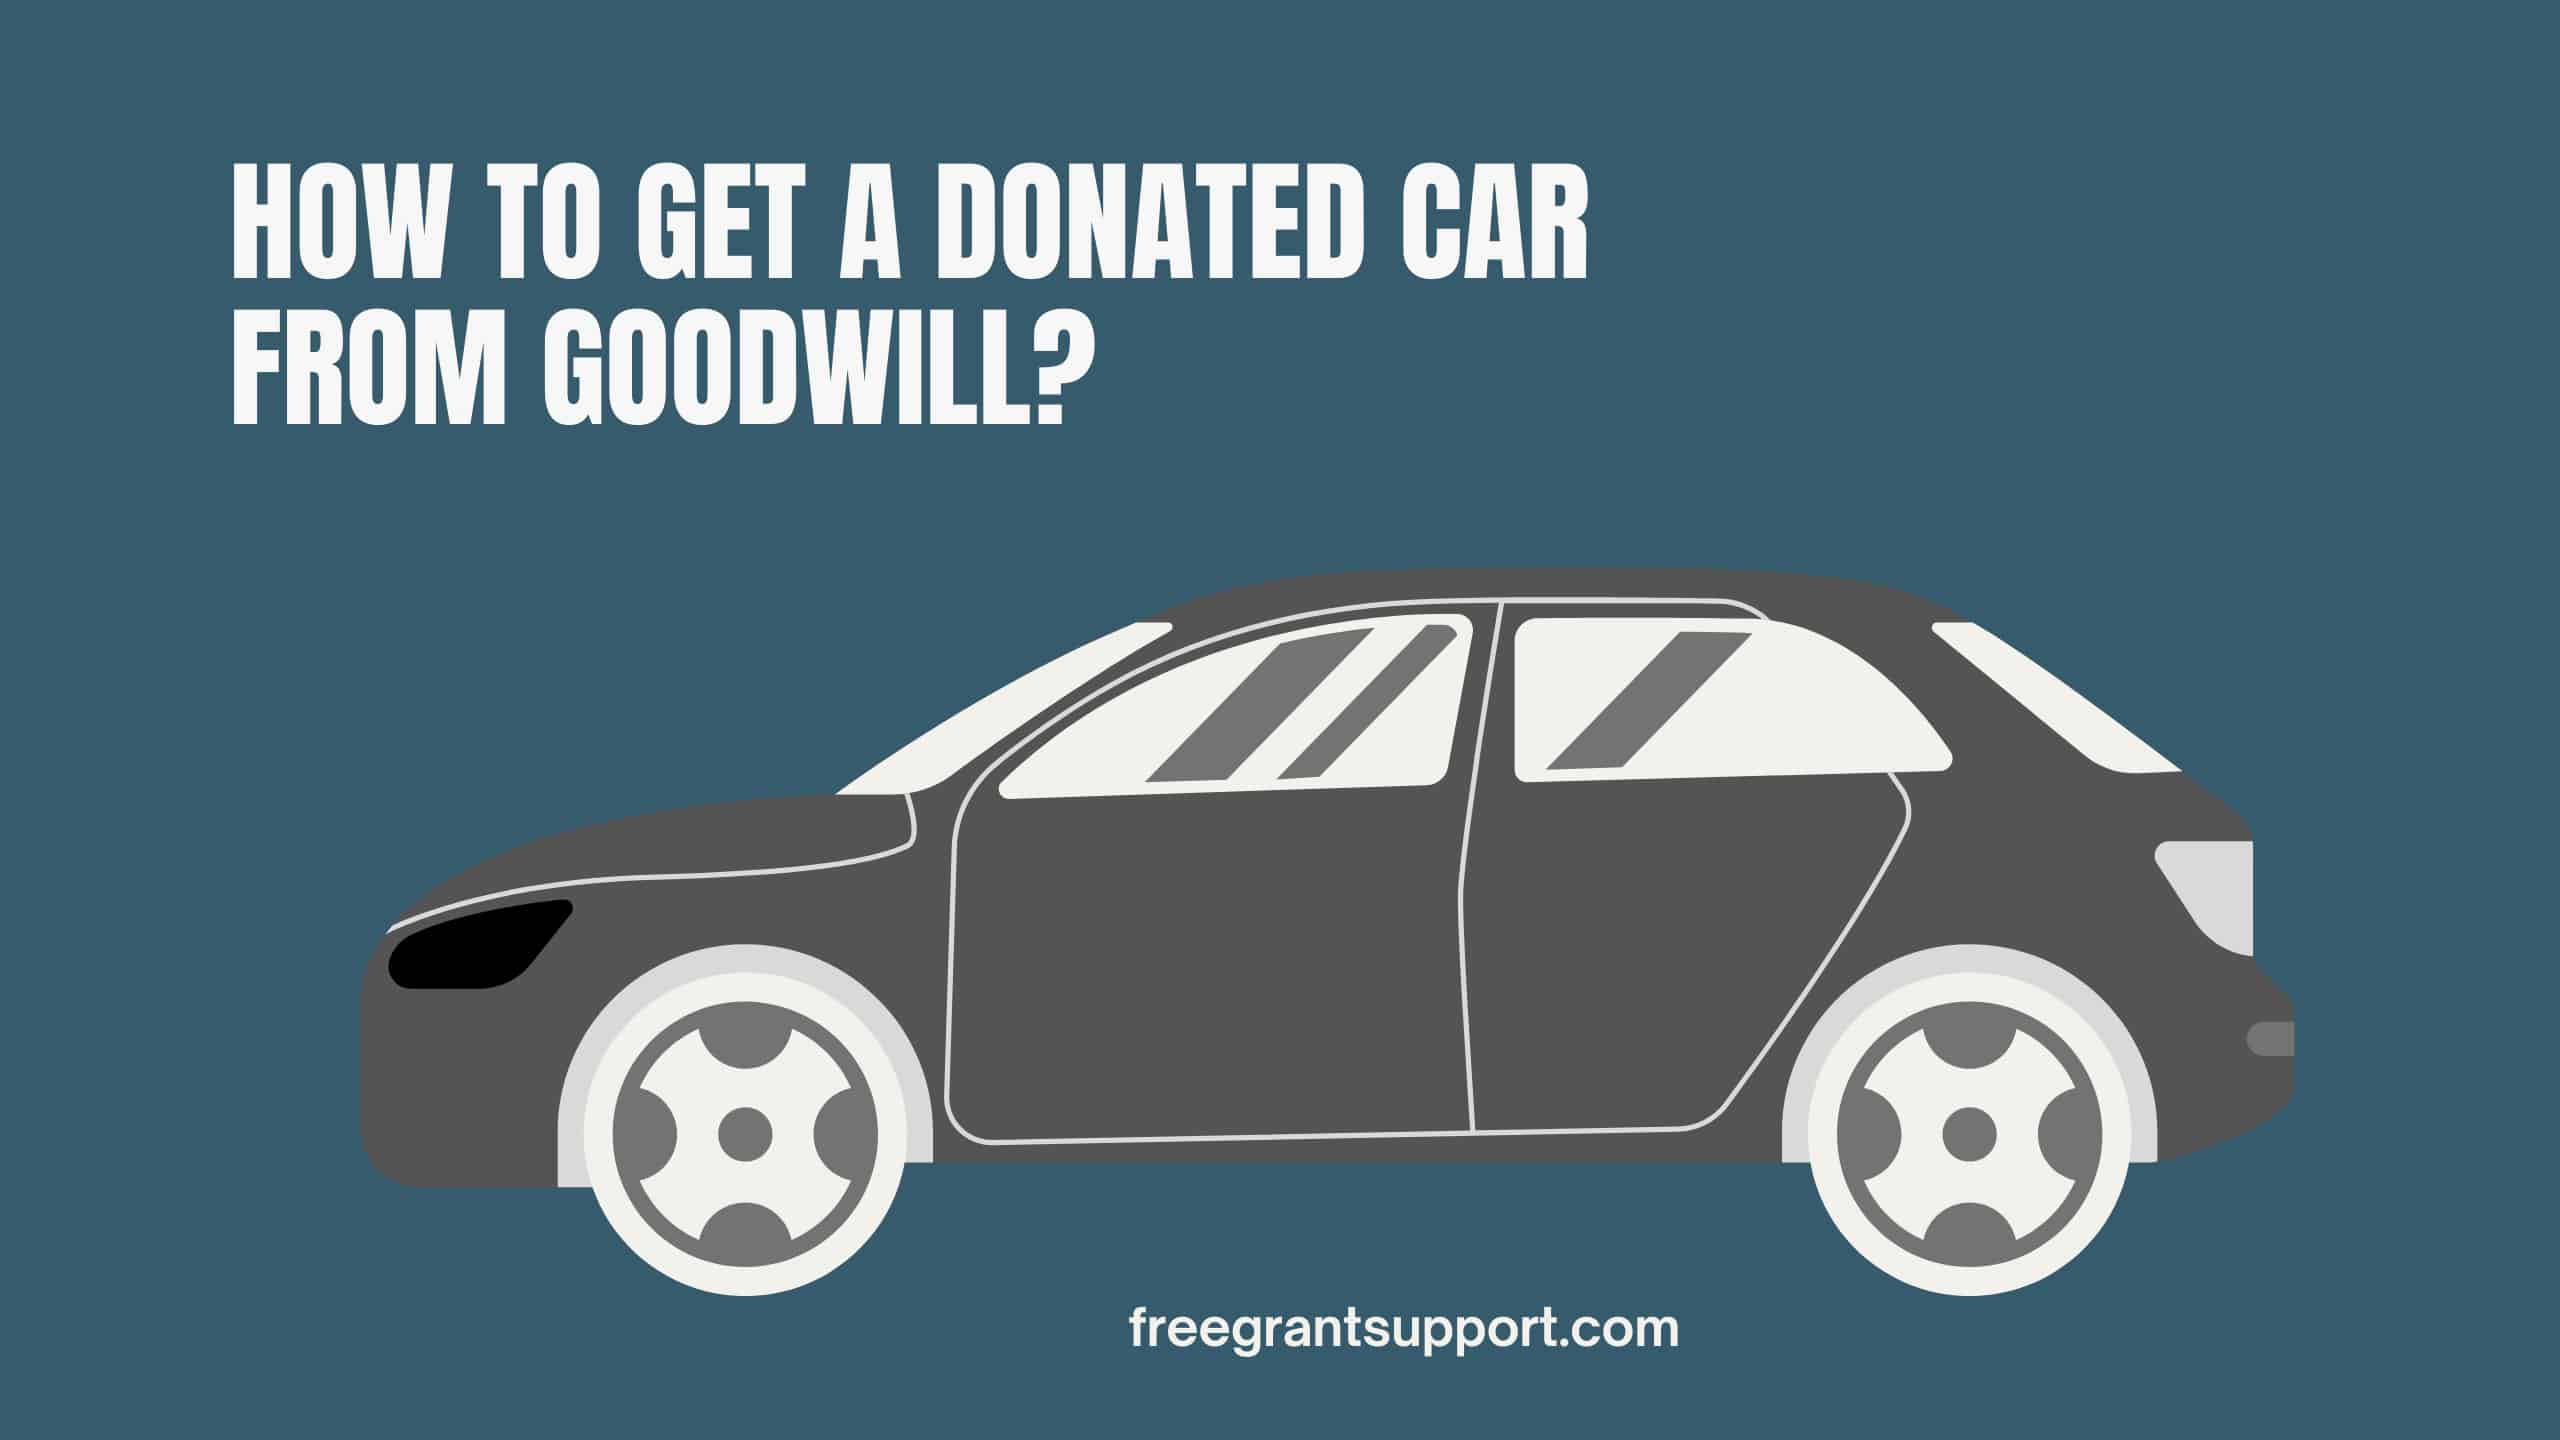 How To Get A Donated Car From Goodwill